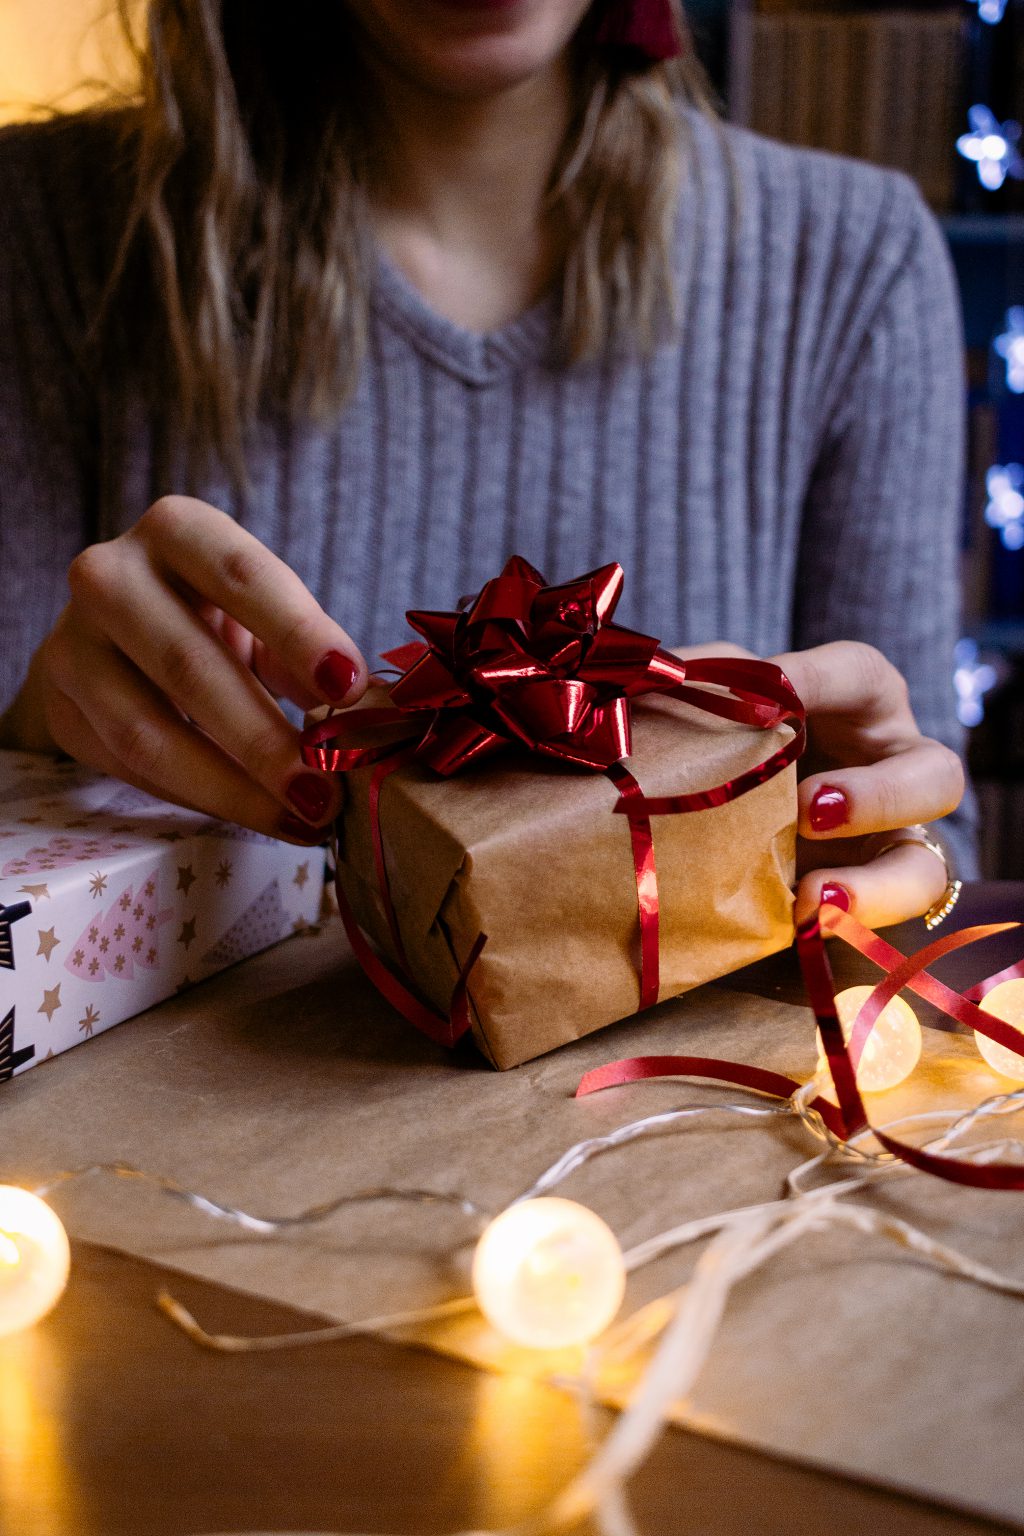 A female decorating a gift 6 - free stock photo